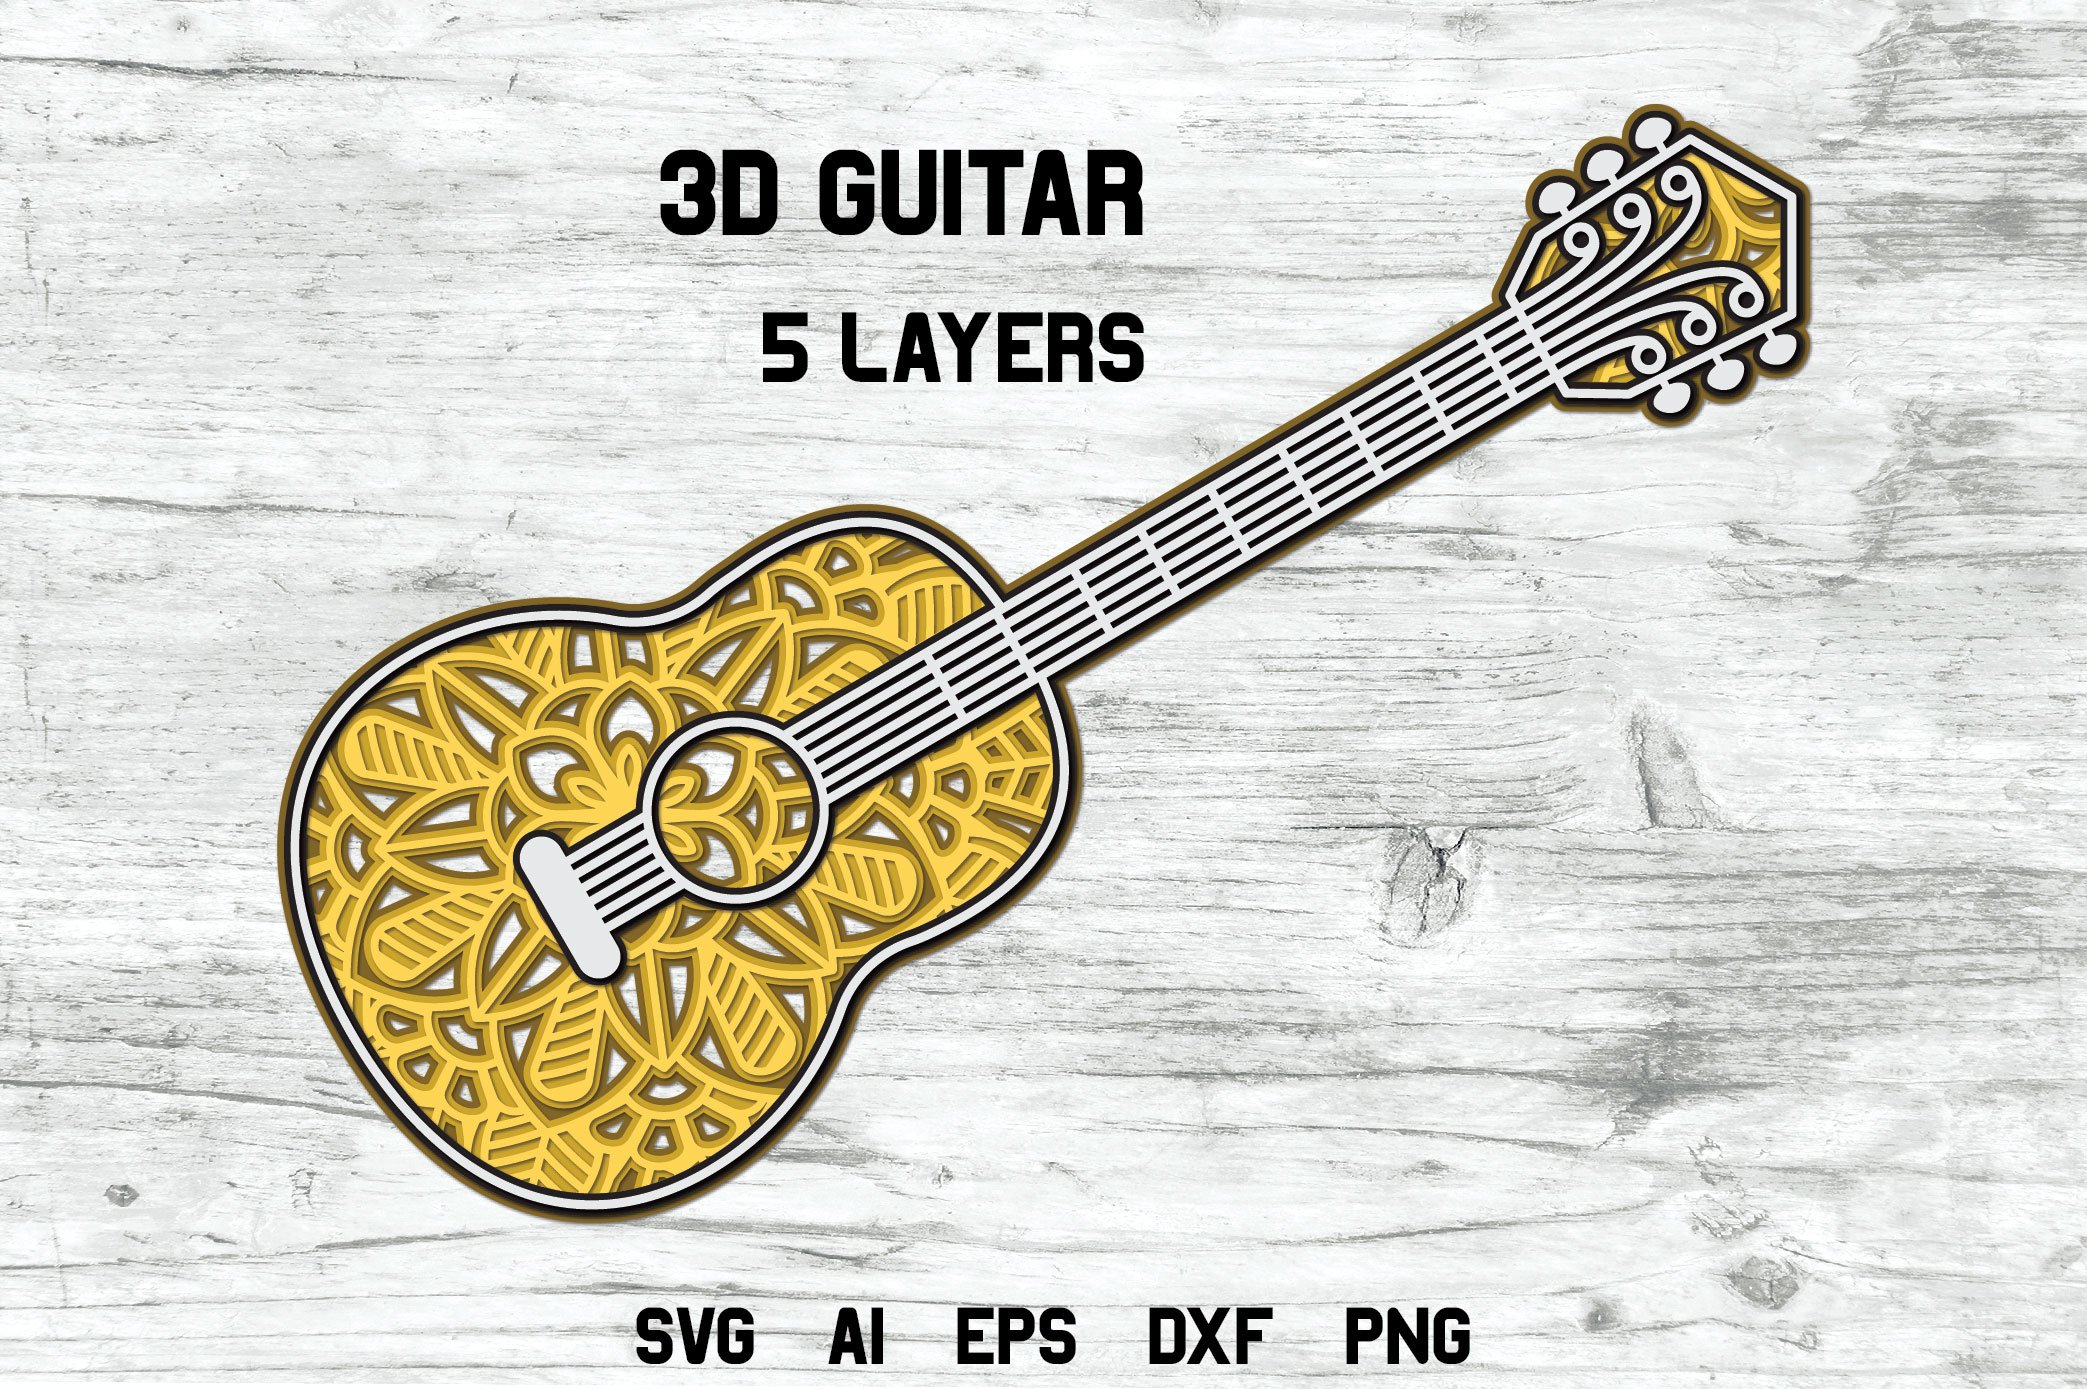 Different images of guitars with different textures.